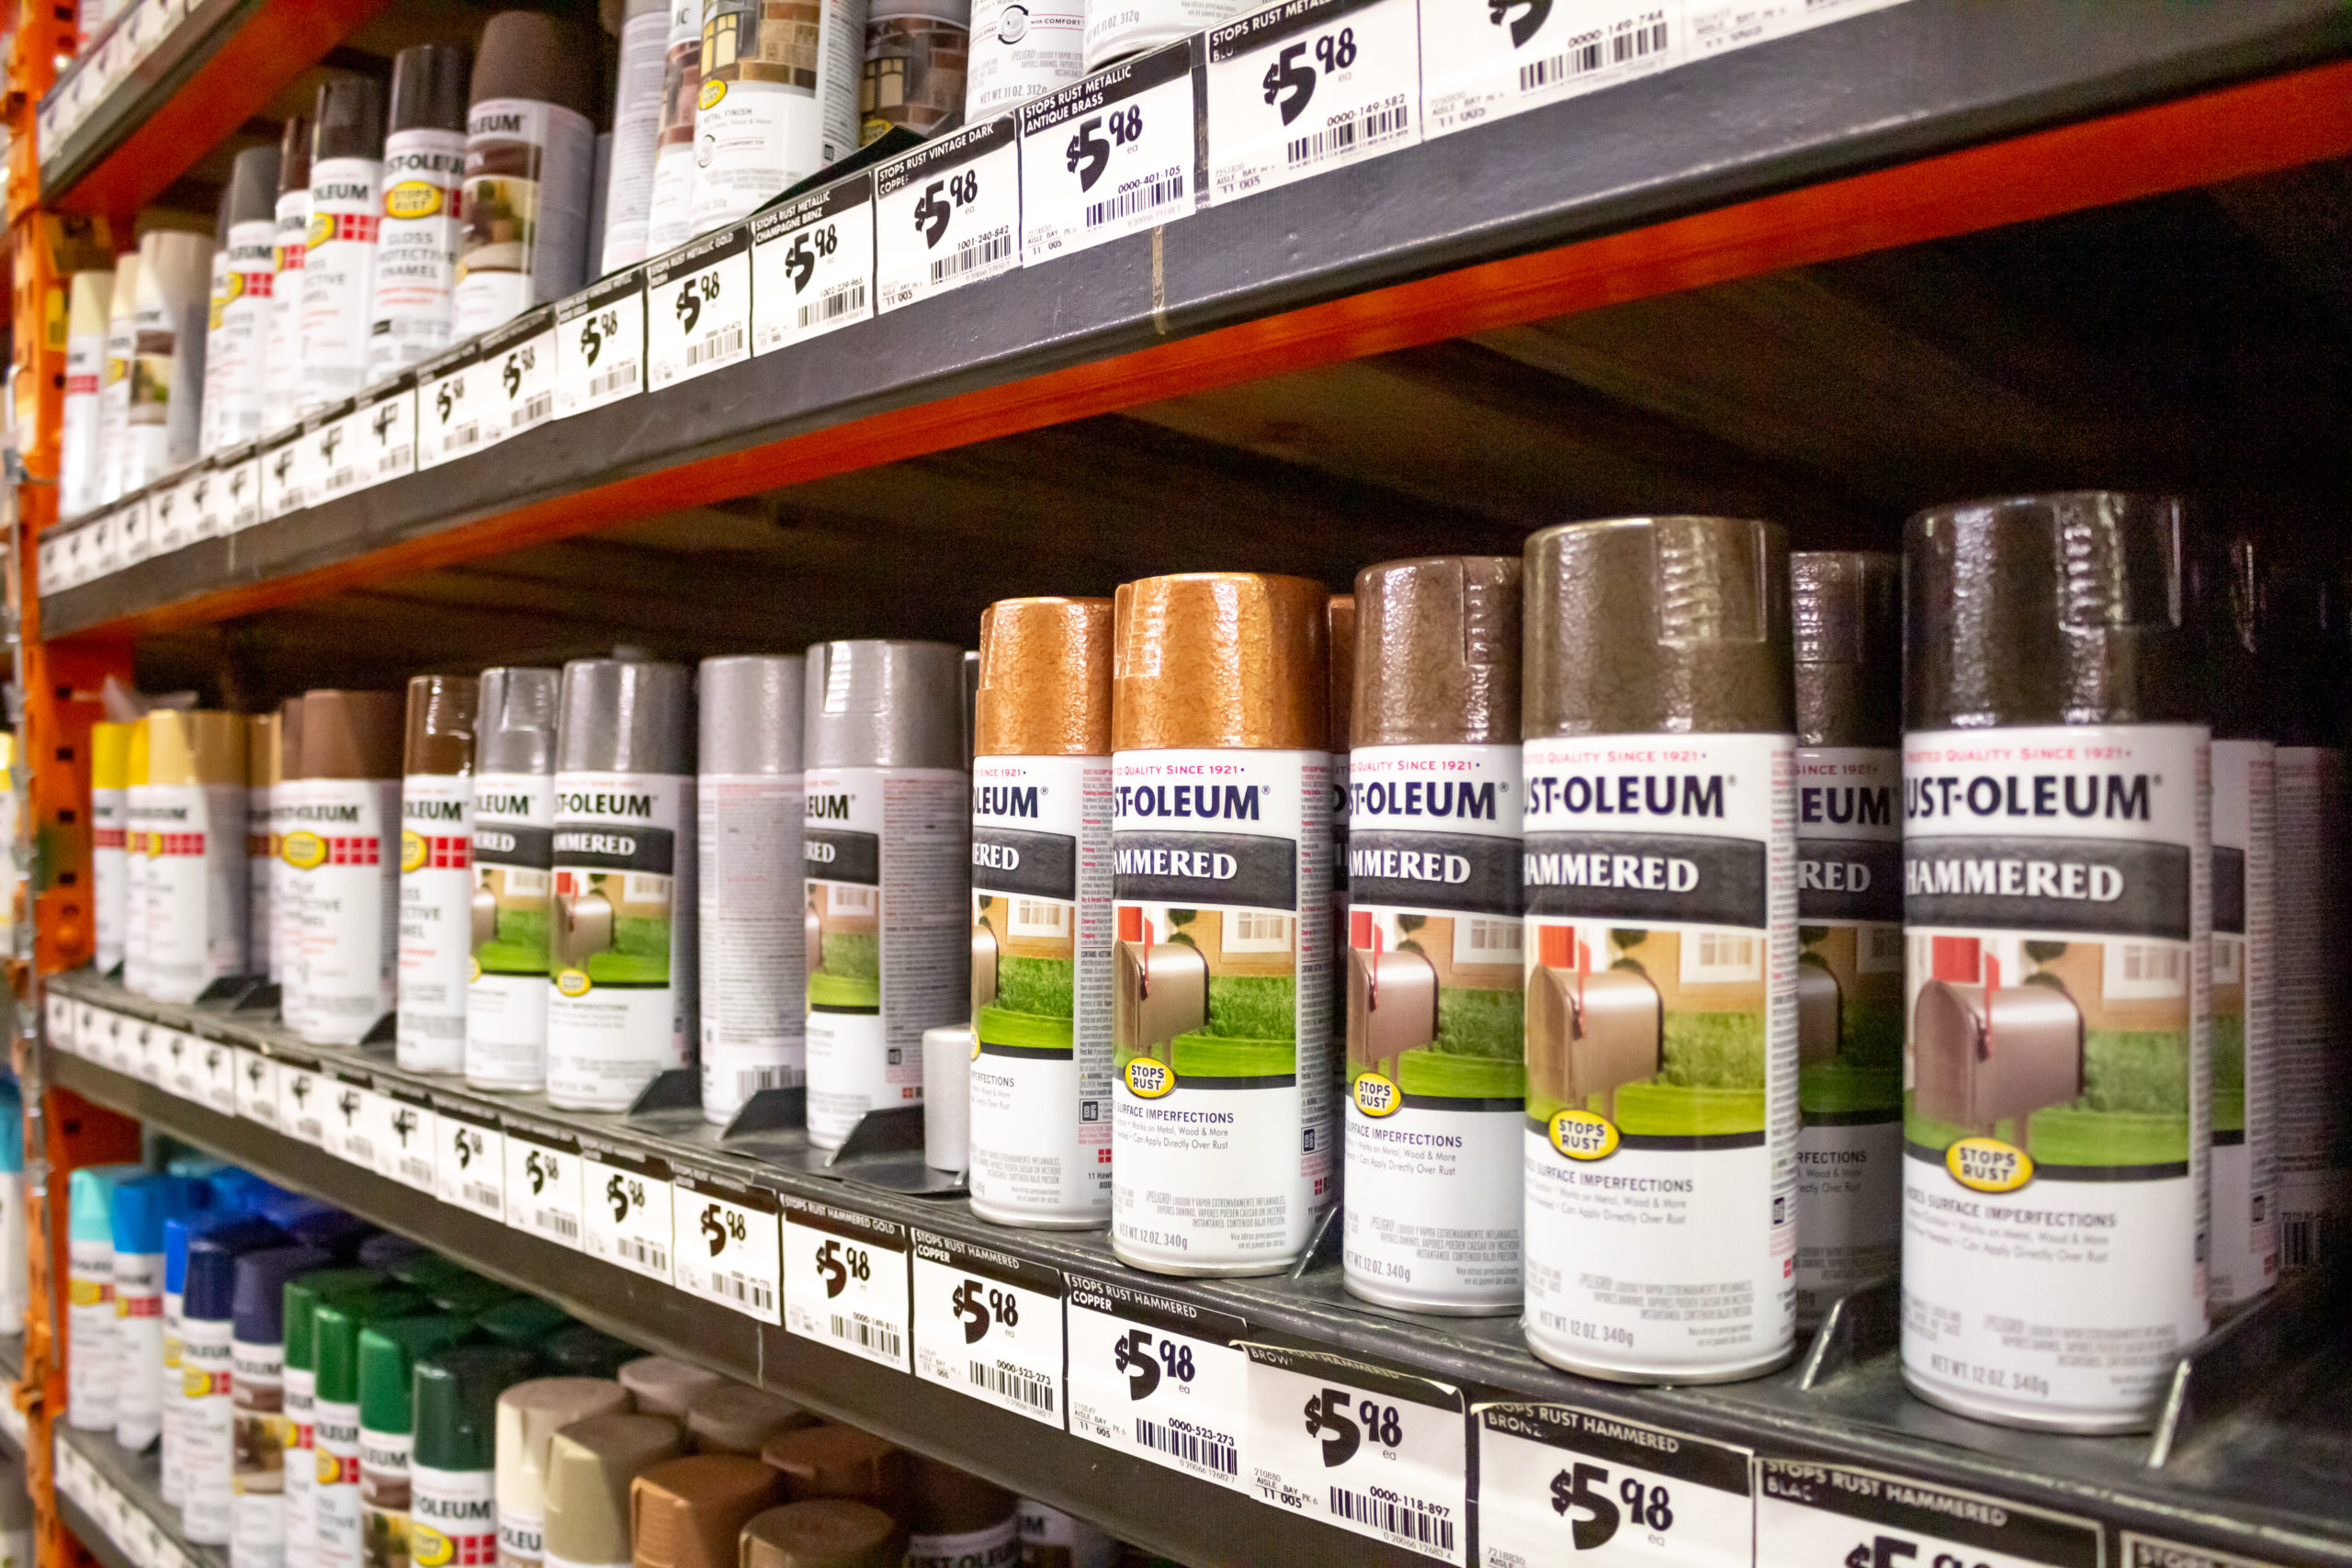 Rust-Oleum Restore Class Action Lawsuit Filed Over Problems With Wood Deck Products pic